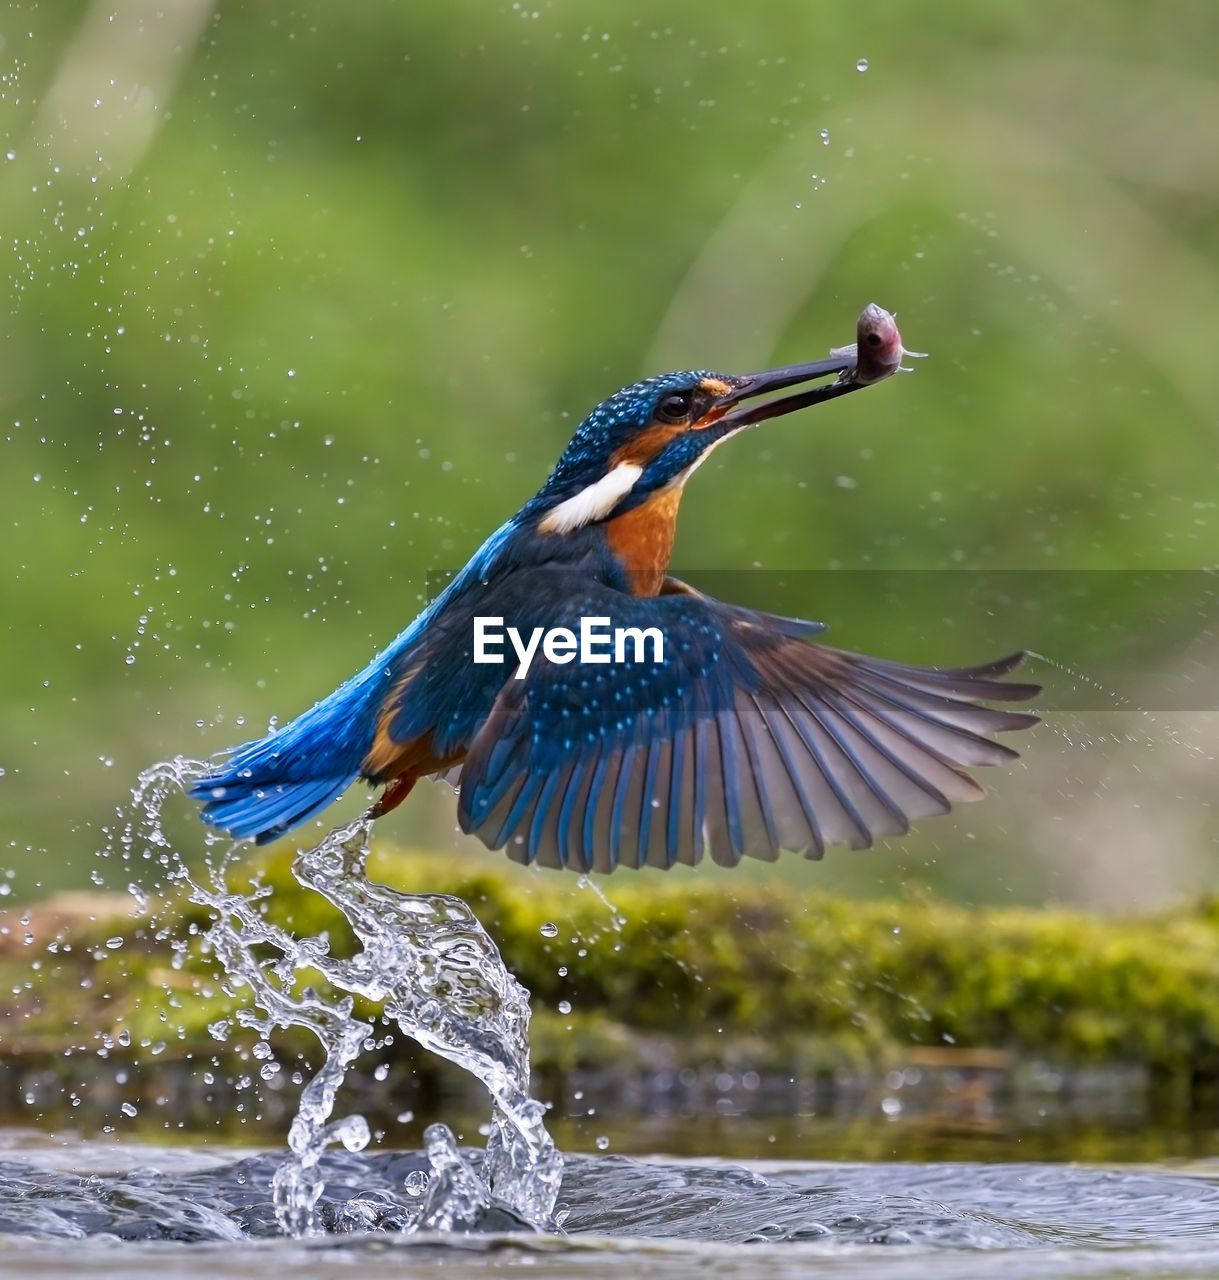 Close up of kingfisher bird launching from water with fish in beak.